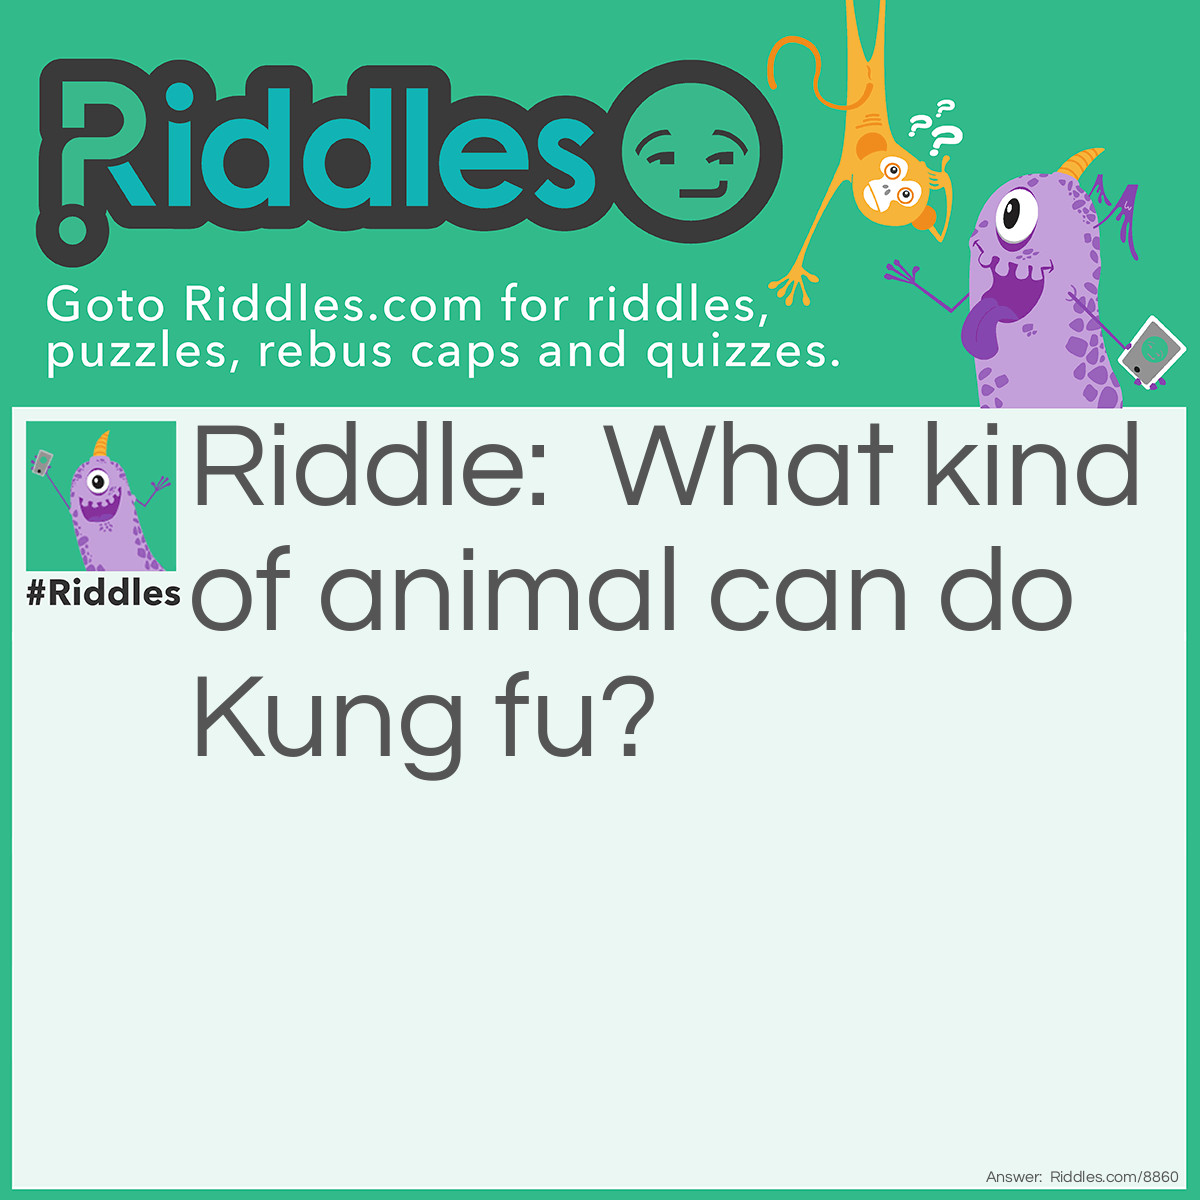 Riddle: What kind of animal can do Kung fu? Answer: Kung fu pandas!